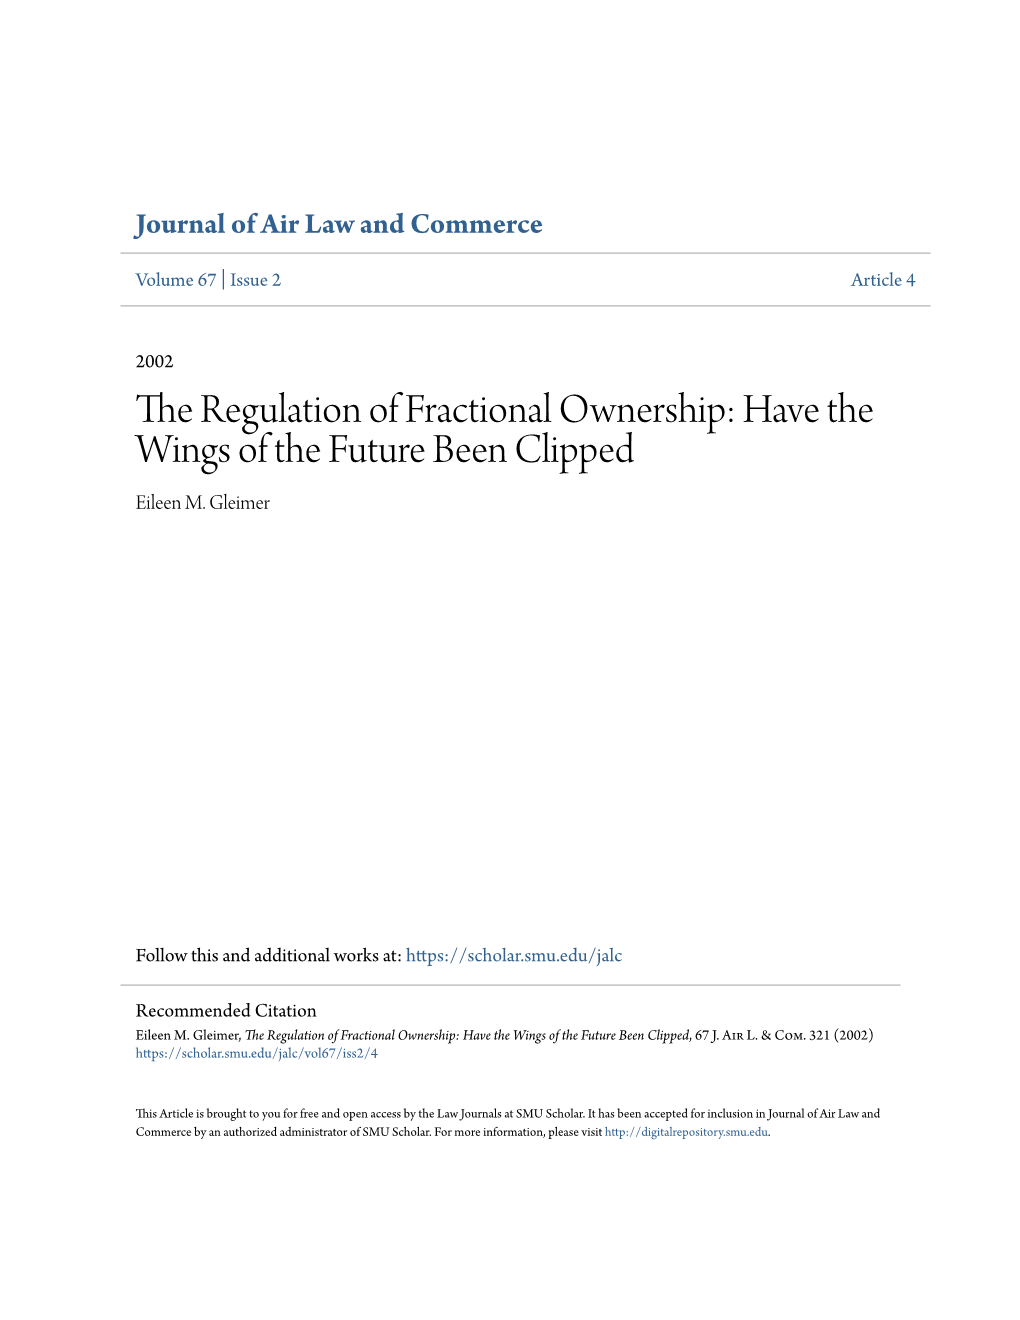 The Regulation of Fractional Ownership: Have the Wings of the Future Been Clipped Eileen M